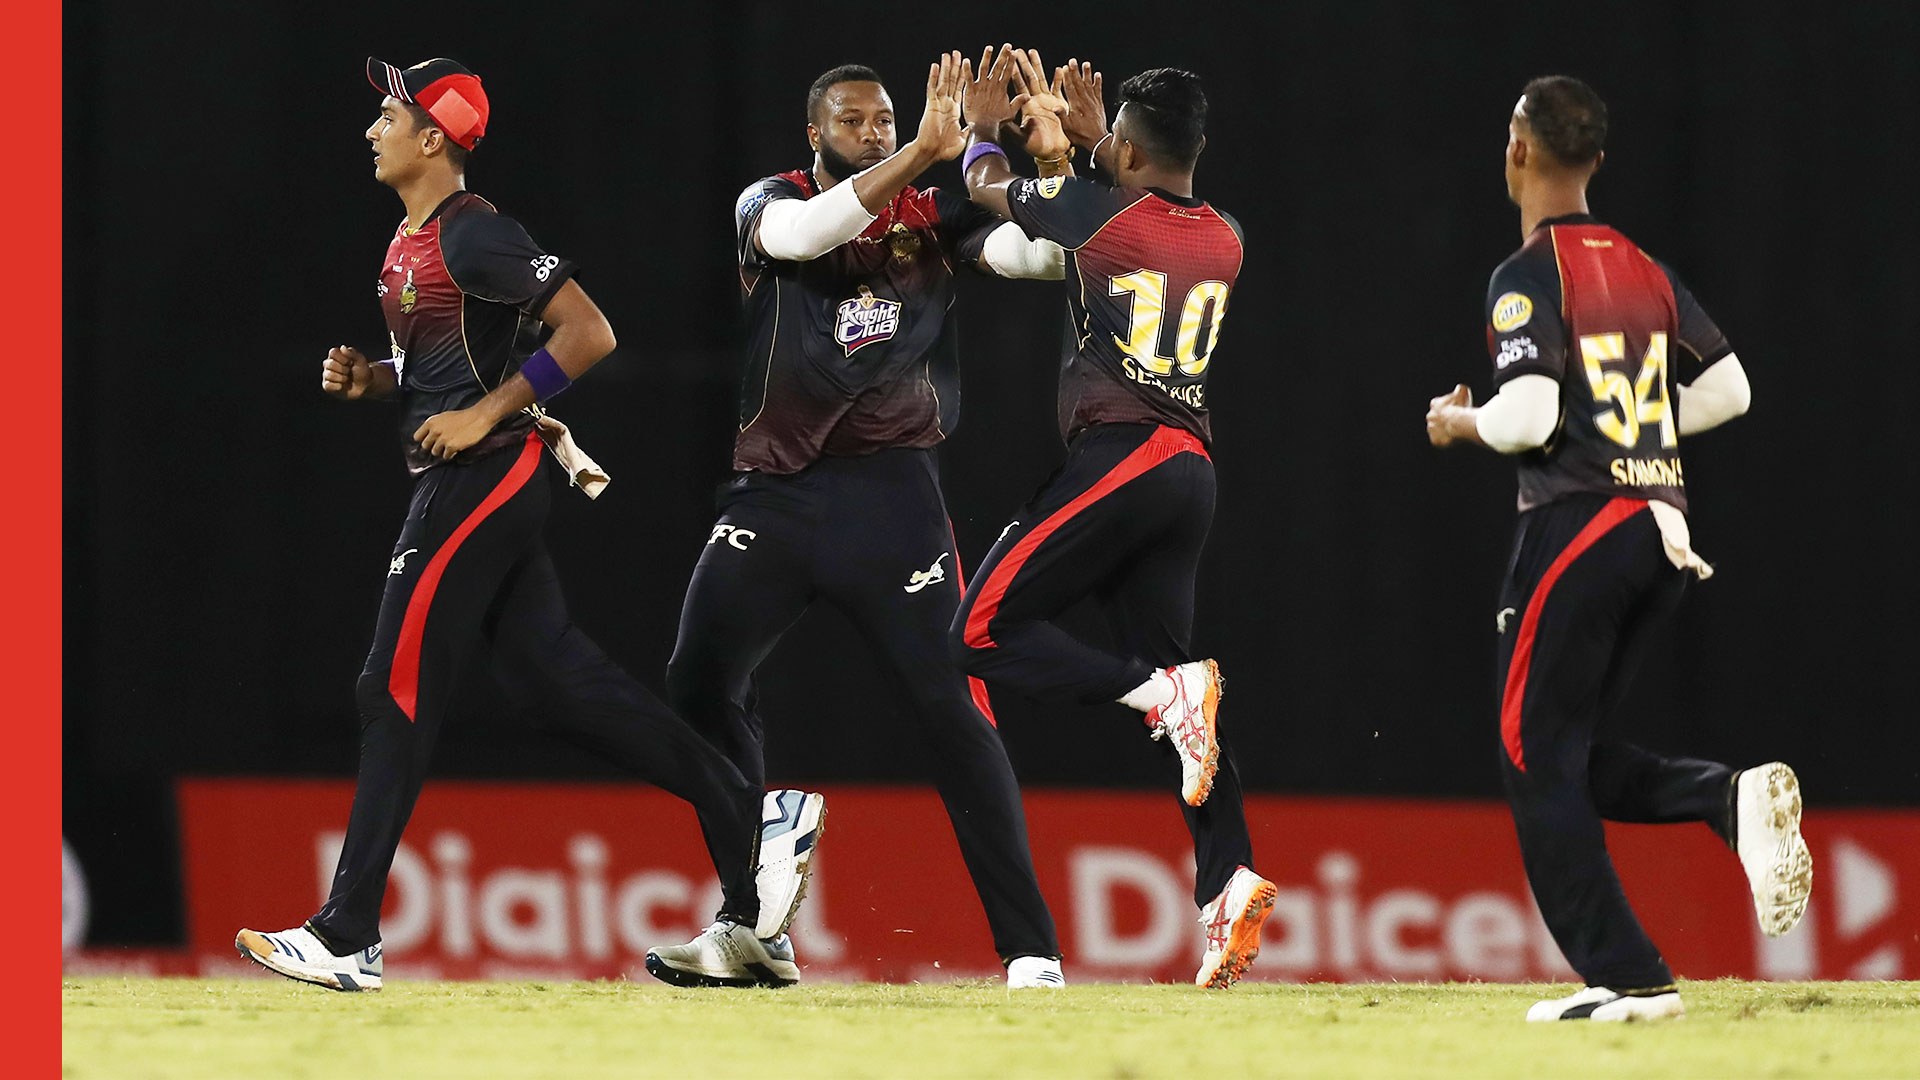 TKR aiming to make CPL T-20 history